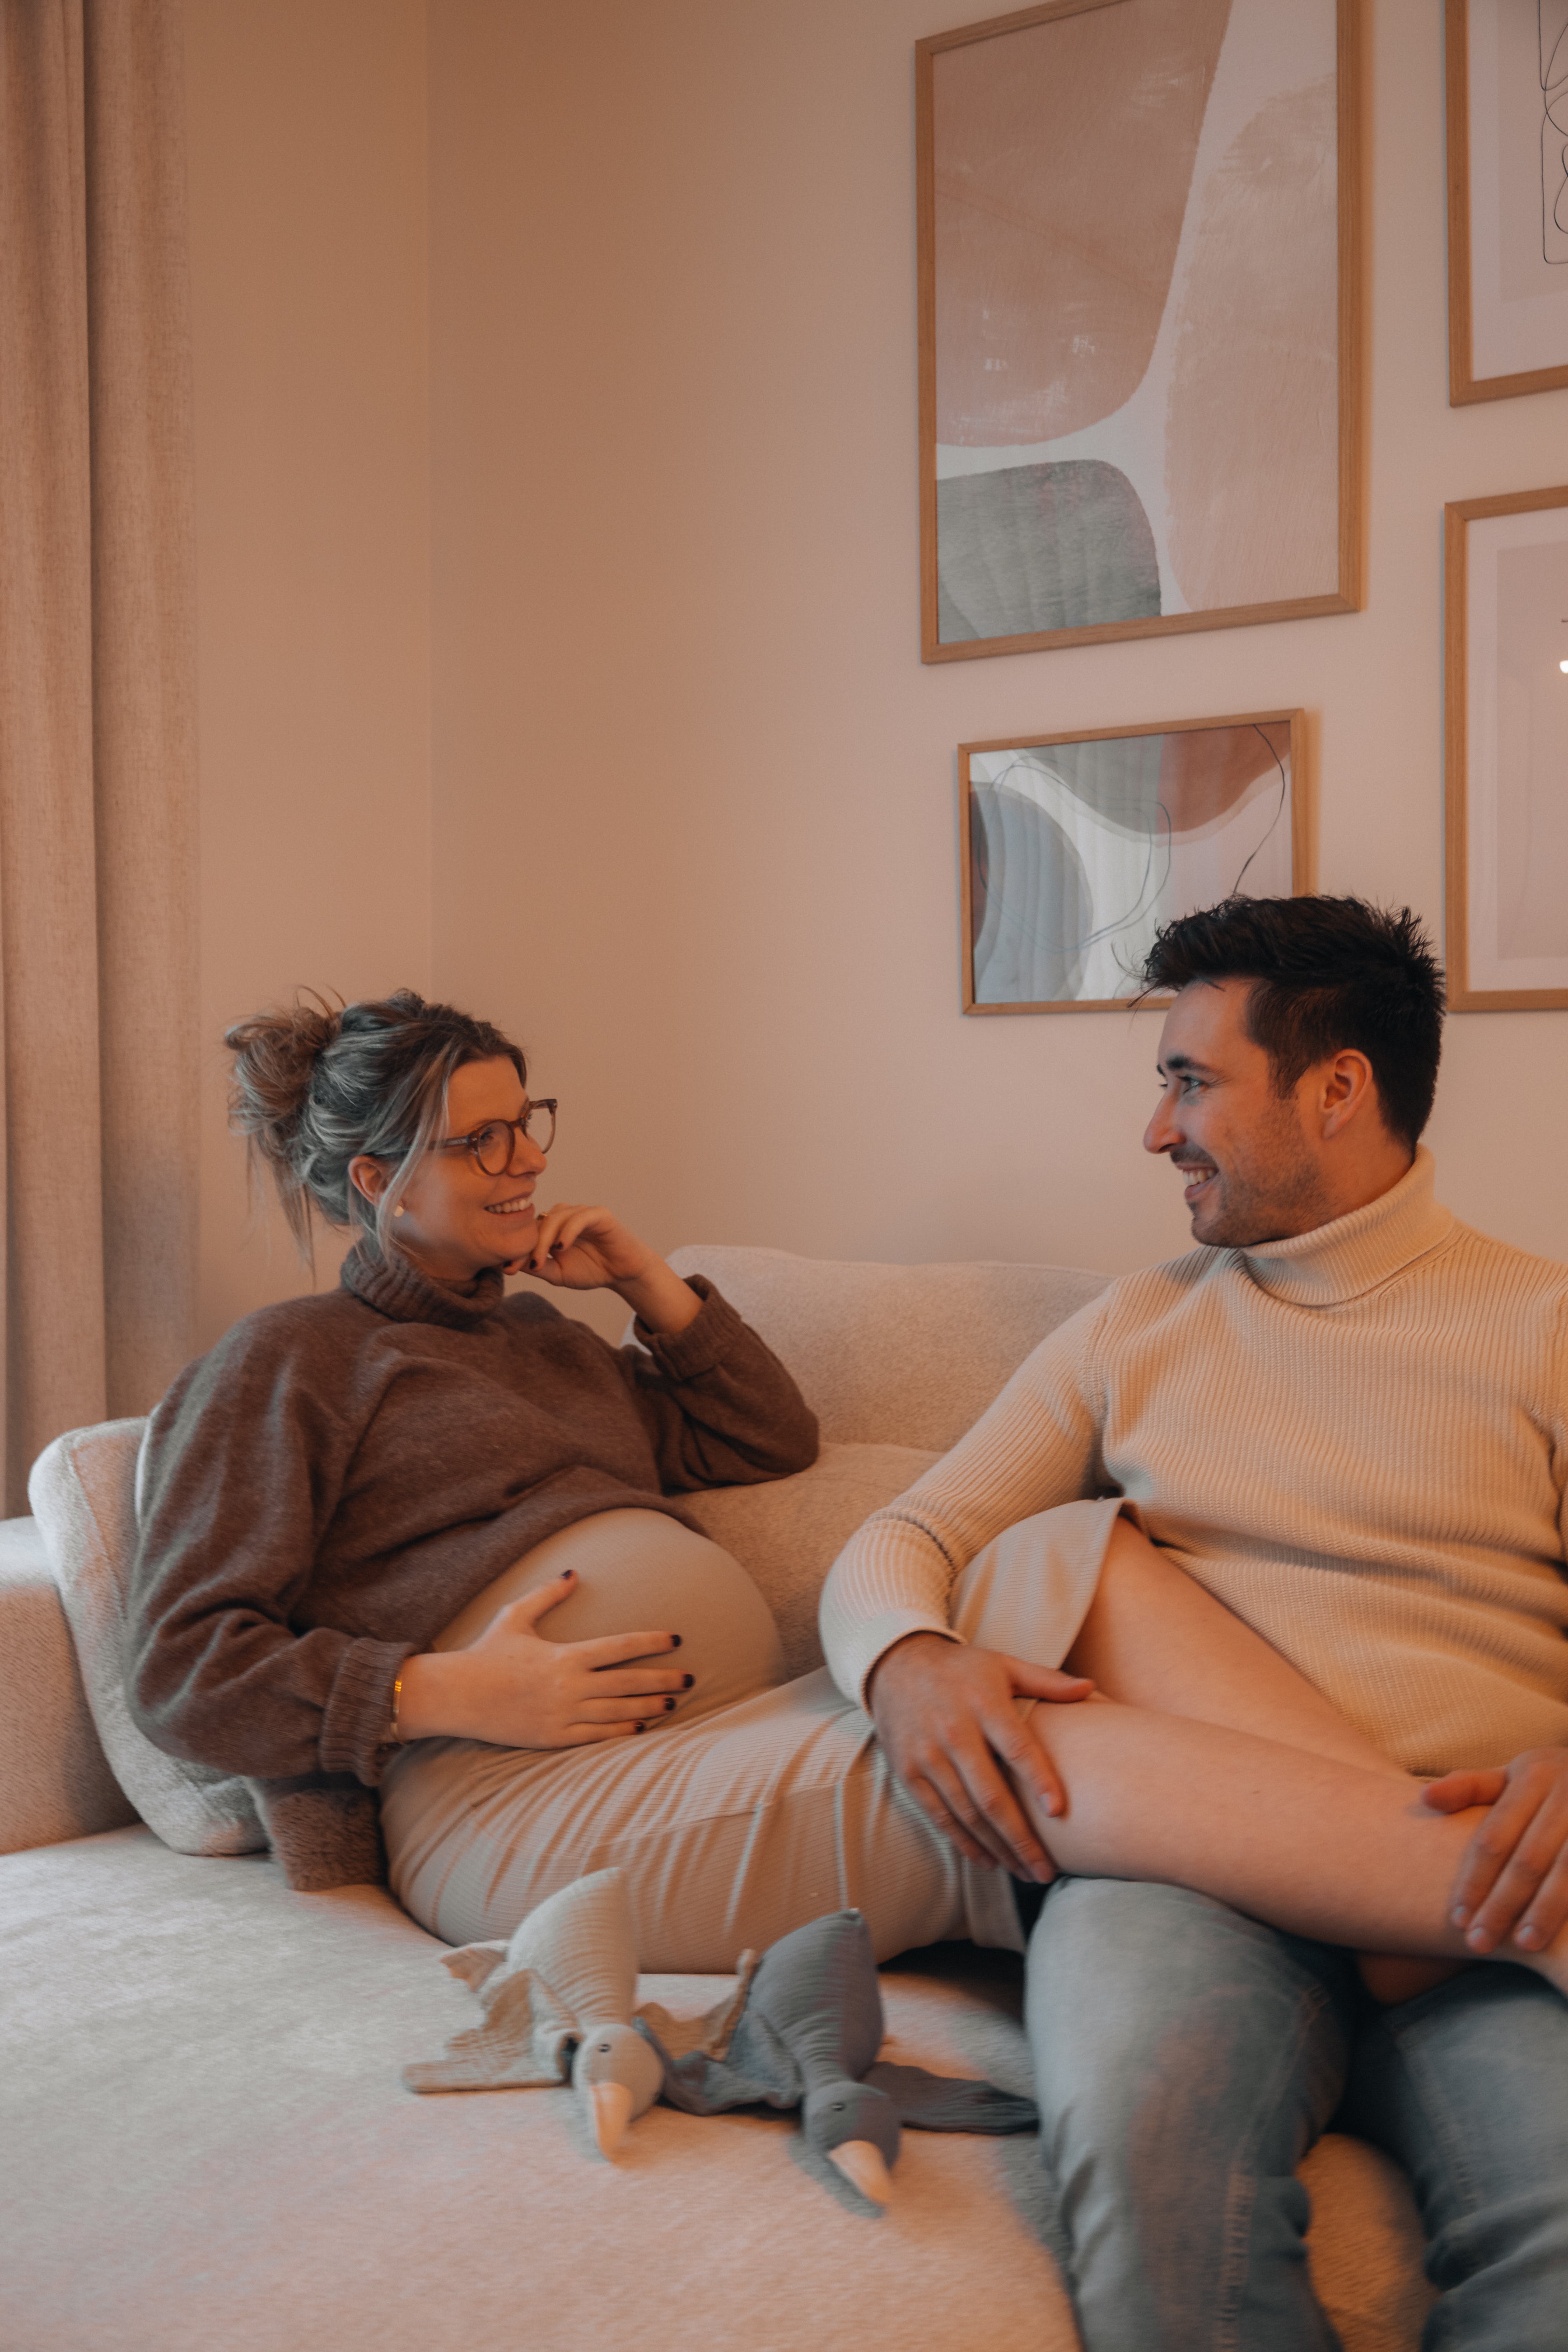 A pregnant woman sits with her legs on her man | Source: Pexels